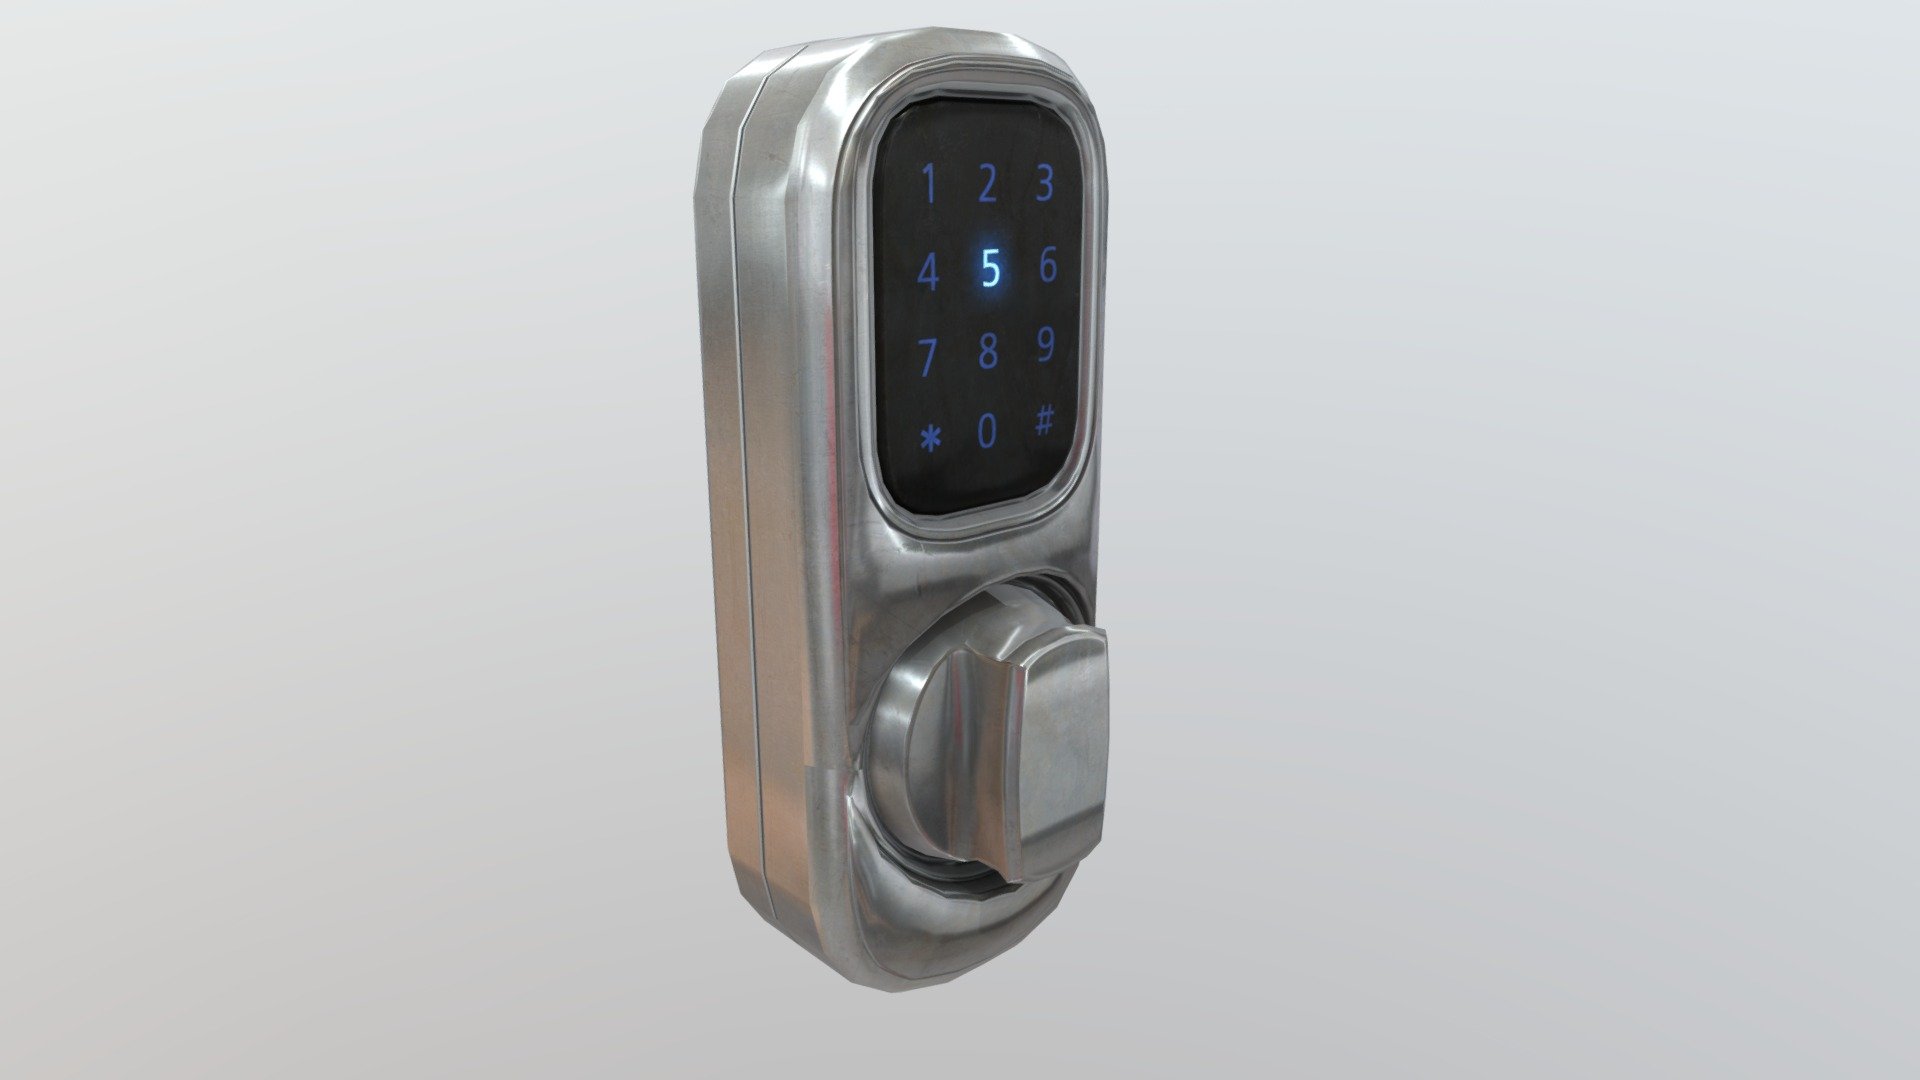 3D Lock
The pack has highly detailed lock ready for use in your project. Just drag and drop prefabs into your scene and achieve beautiful results in no time. Available formats FBX, 3DS Max 2017



We are here to empower the creators. Please contact us via the [Contact US](https://aaanimators.com/#contact-area) page if you are having issues with our assets. 




The following document provides a highly detailed description of the asset:
[READ ME]()




**Mesh complexities:**


Lock_01 806 verts; 1210 tris



Includes 1 set of textures with 3 materials:



● Diffuse

● Normal

● Specular - Smart Electronic Door Lock 01 - Buy Royalty Free 3D model by aaanimators 3d model